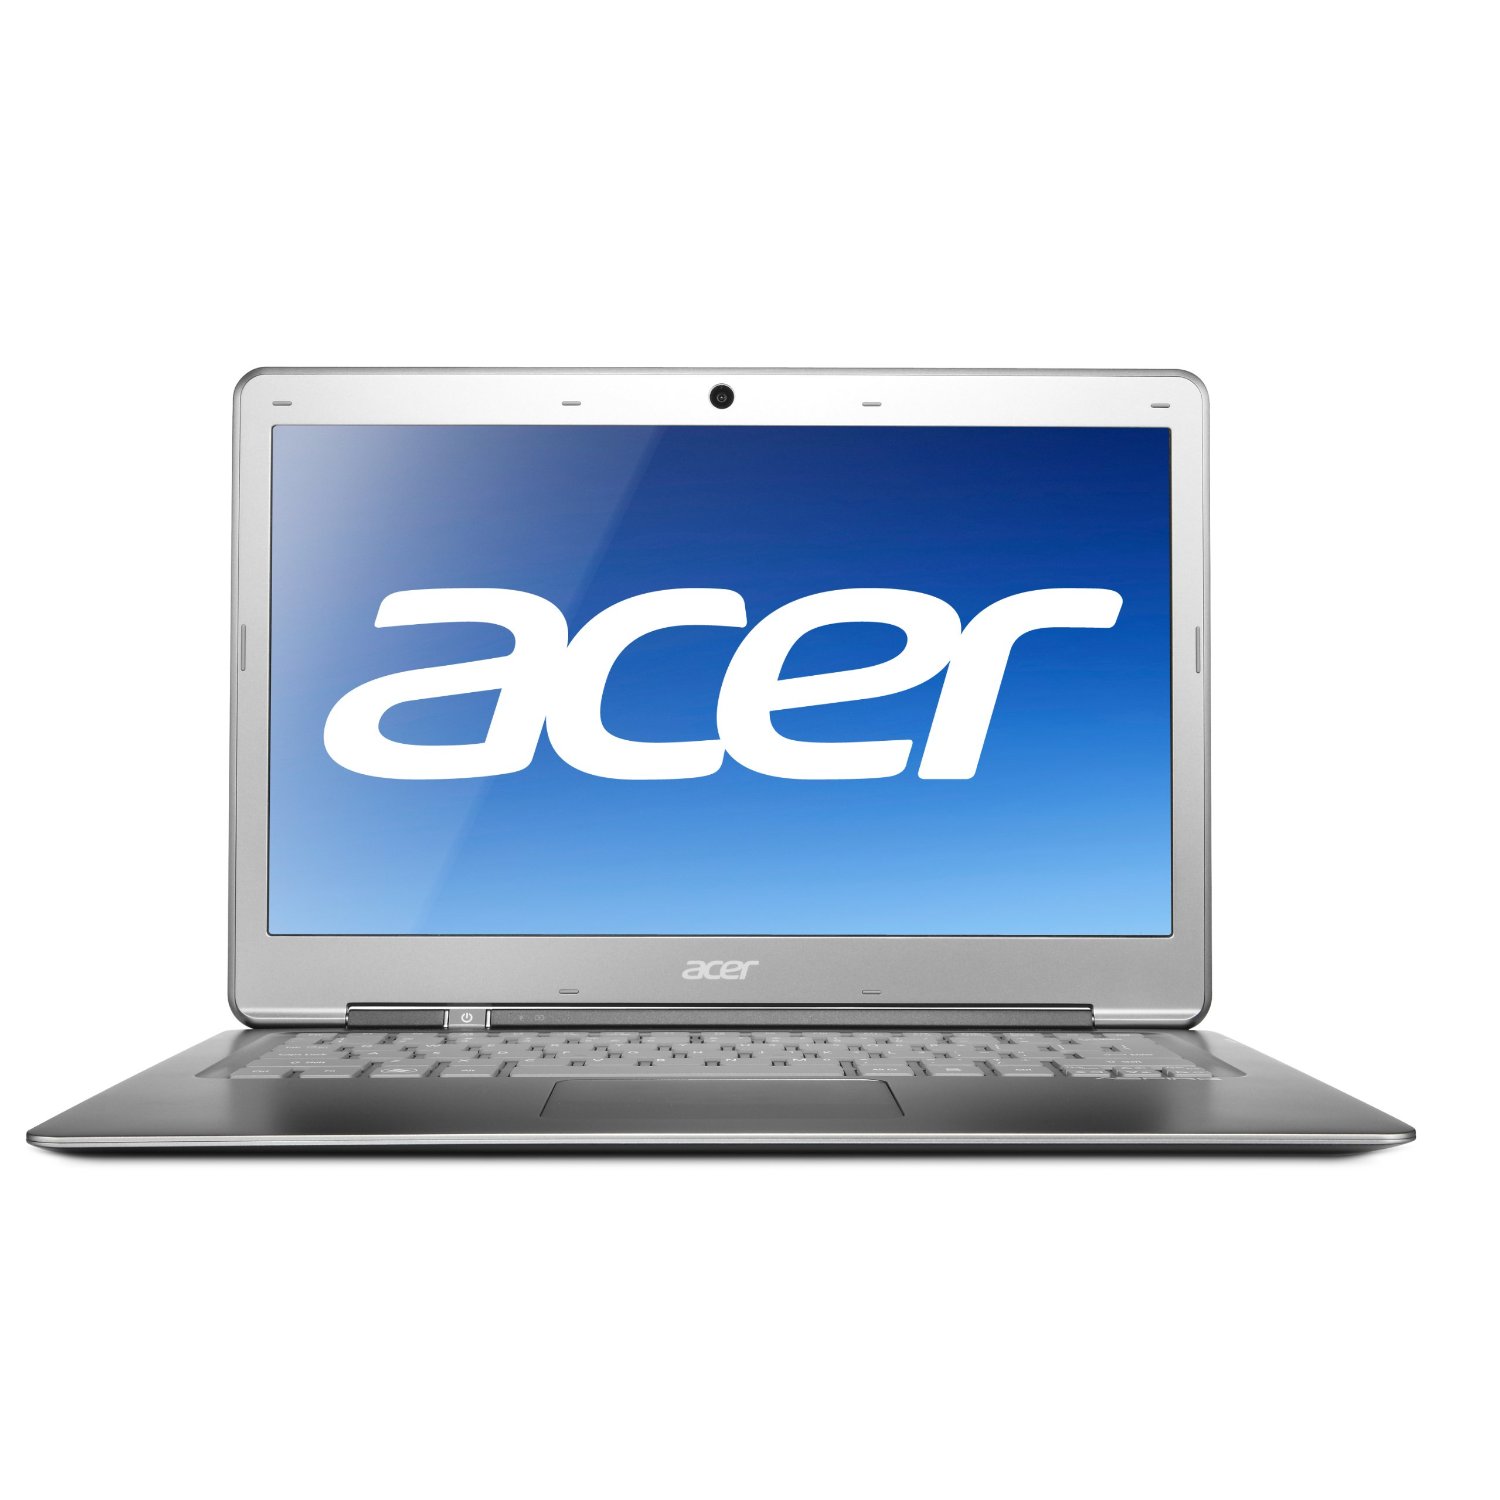 http://thetechjournal.com/wp-content/uploads/images/1111/1322192769-acer-aspire-s39516828-133inch-hd-display-ultrabook-5.jpg